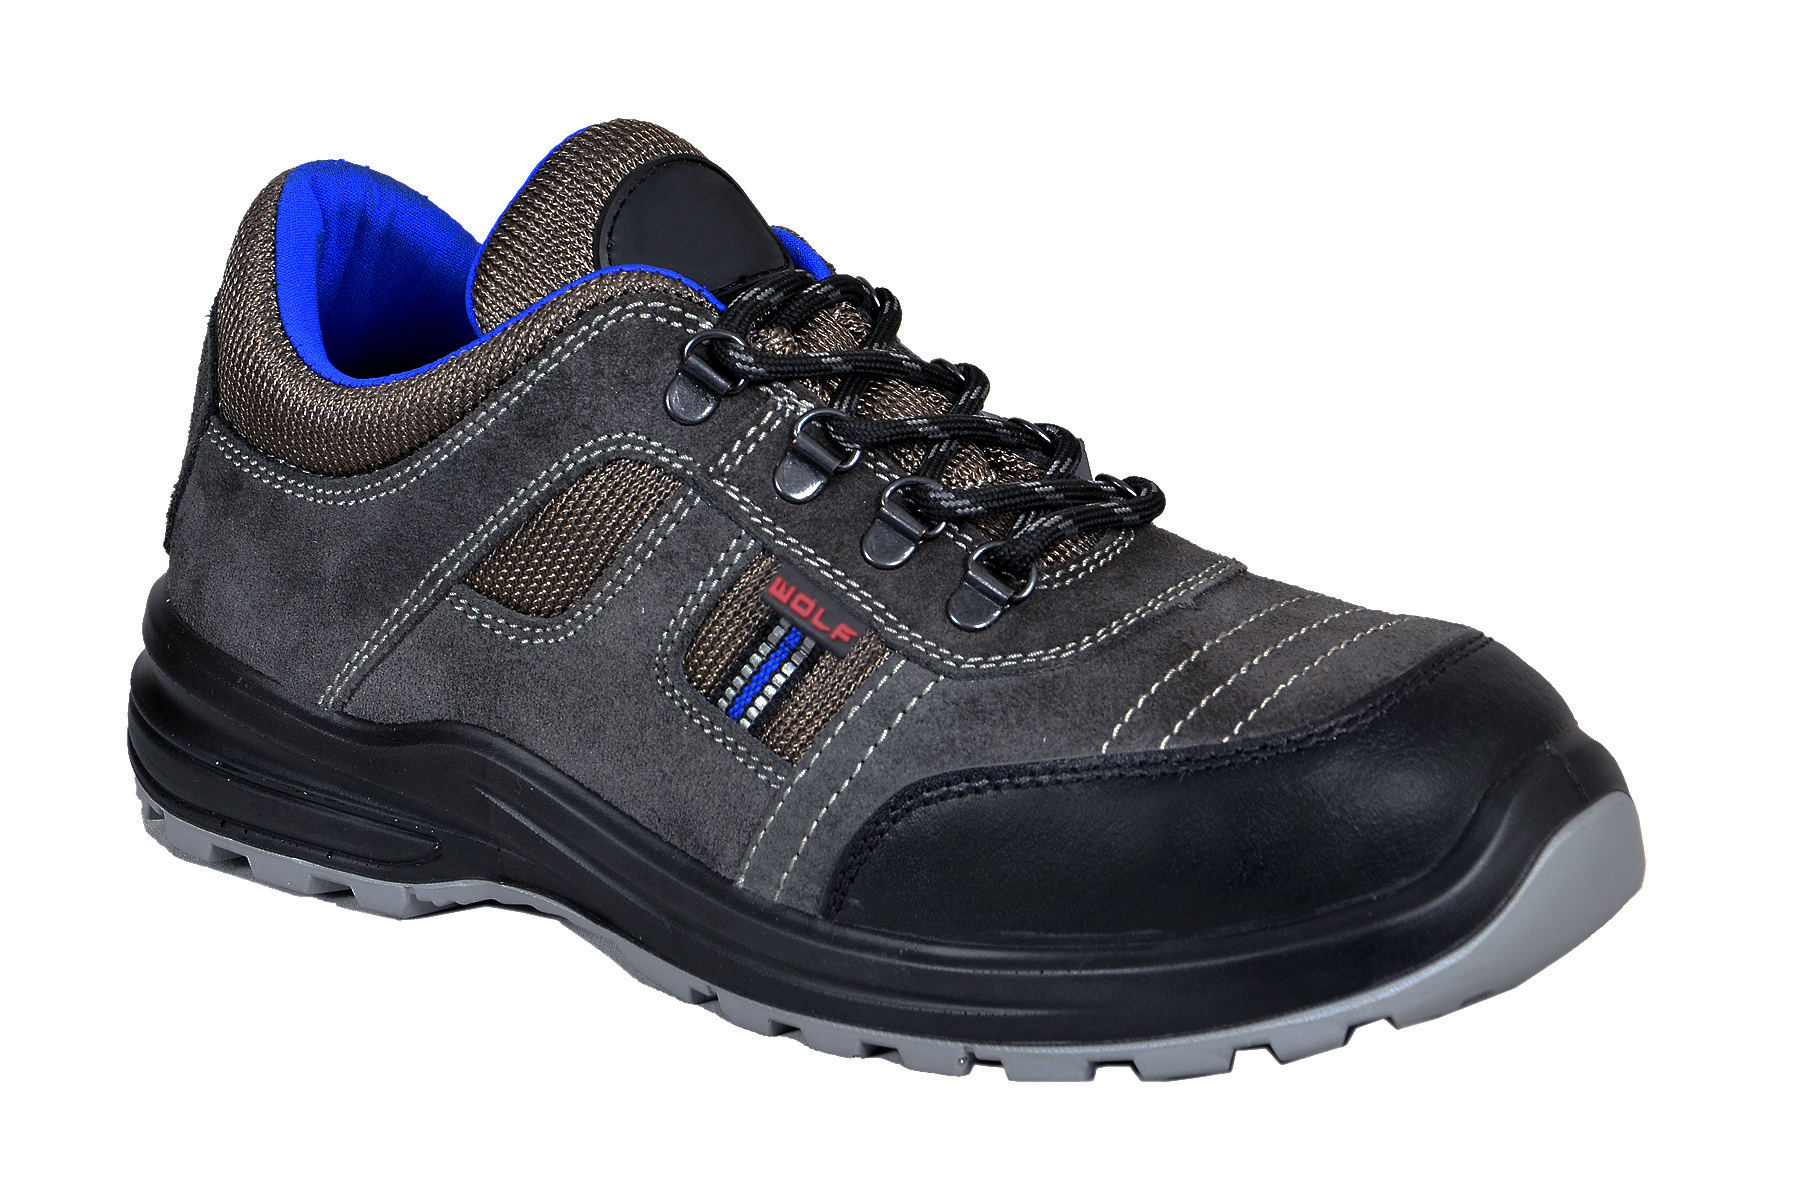 Double Density PU Safety Trainer Shoe